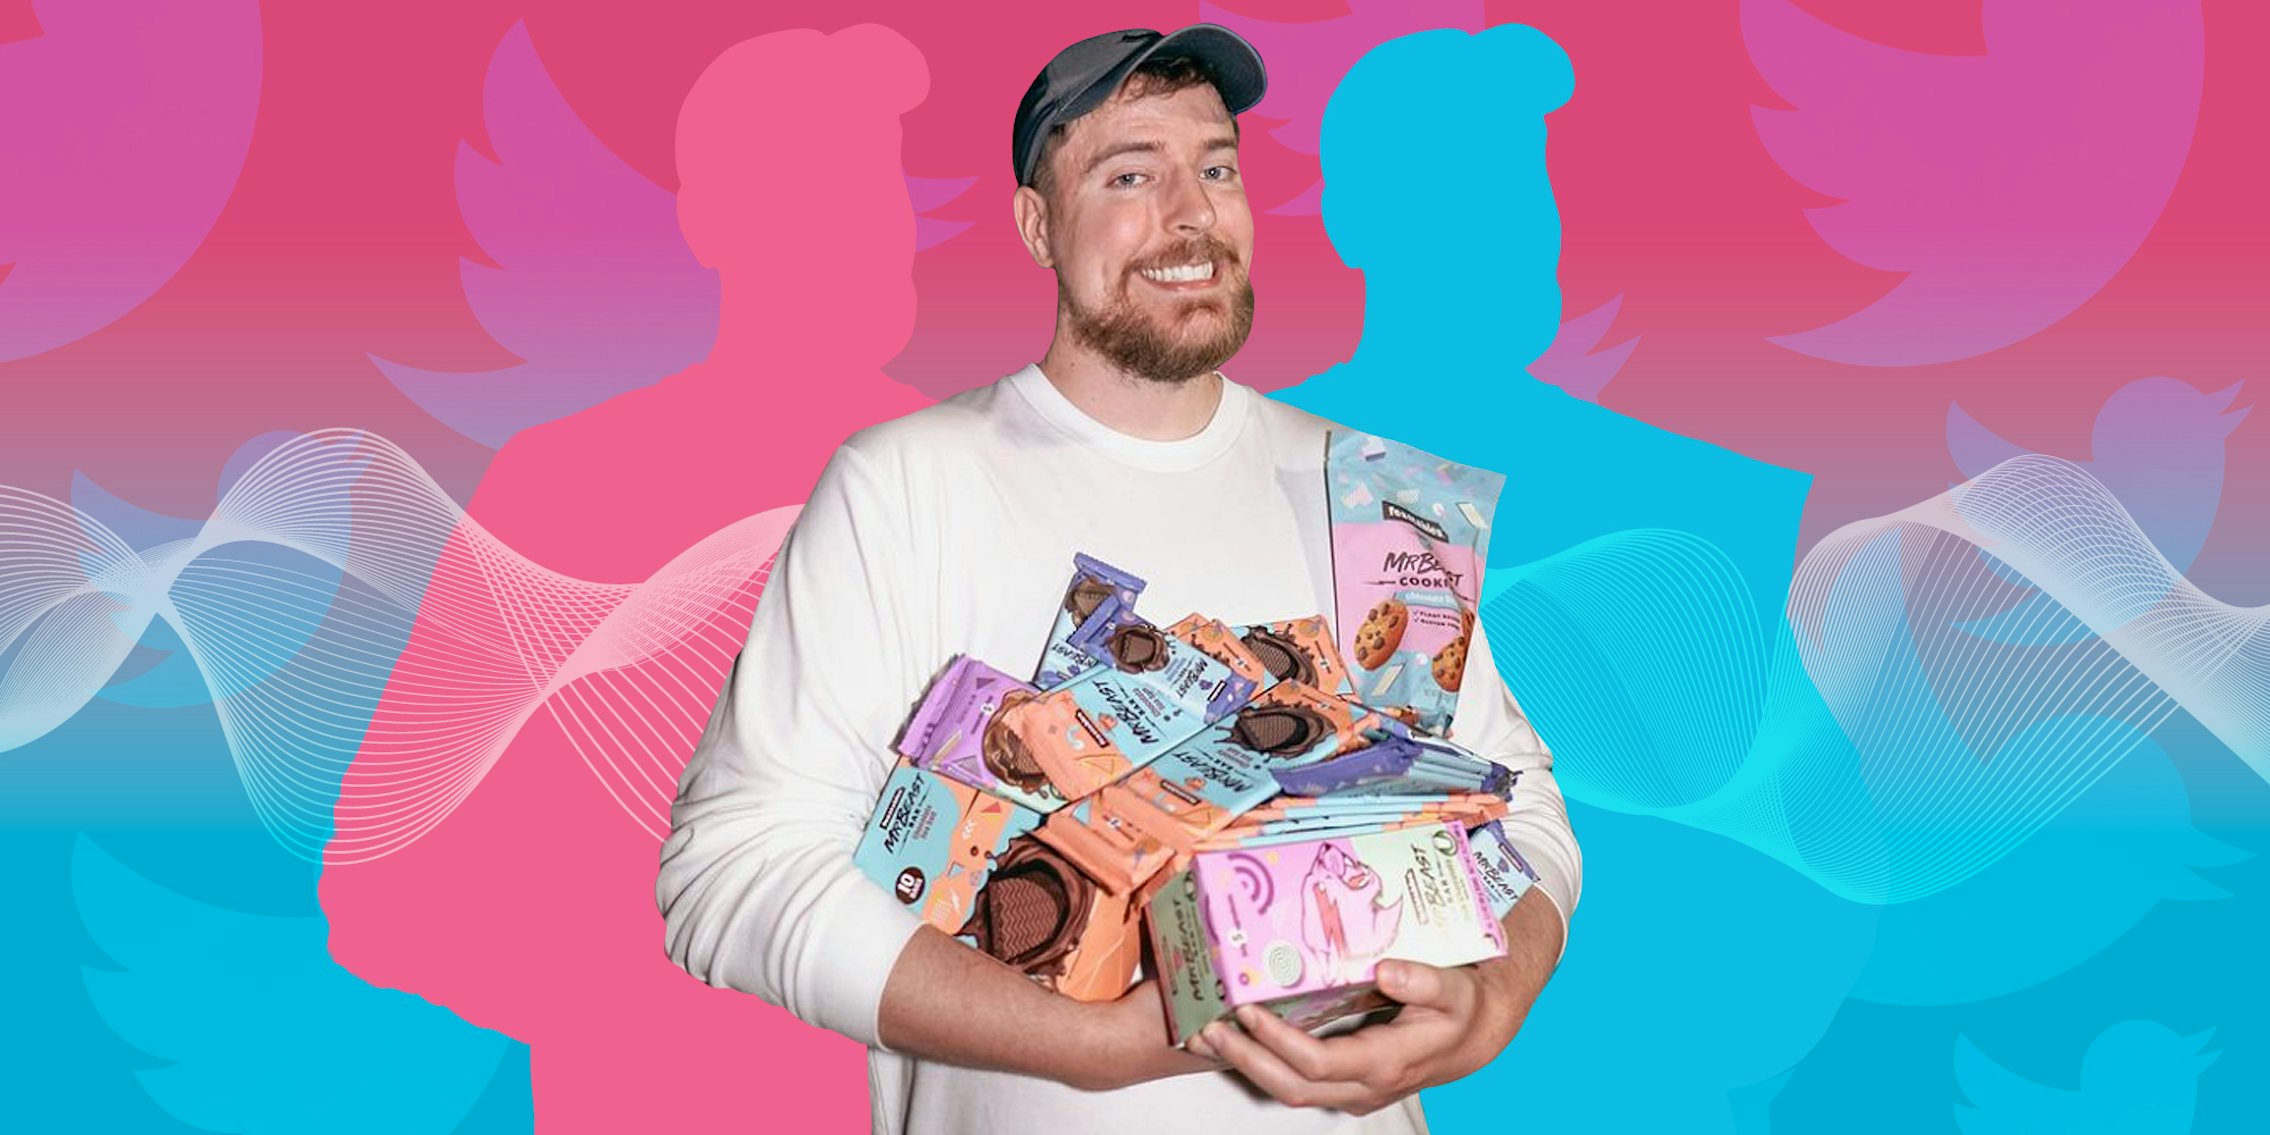 Mr Beast holding chocolate bars in front of pink to blue vertical gradient background Passionfruit Remix